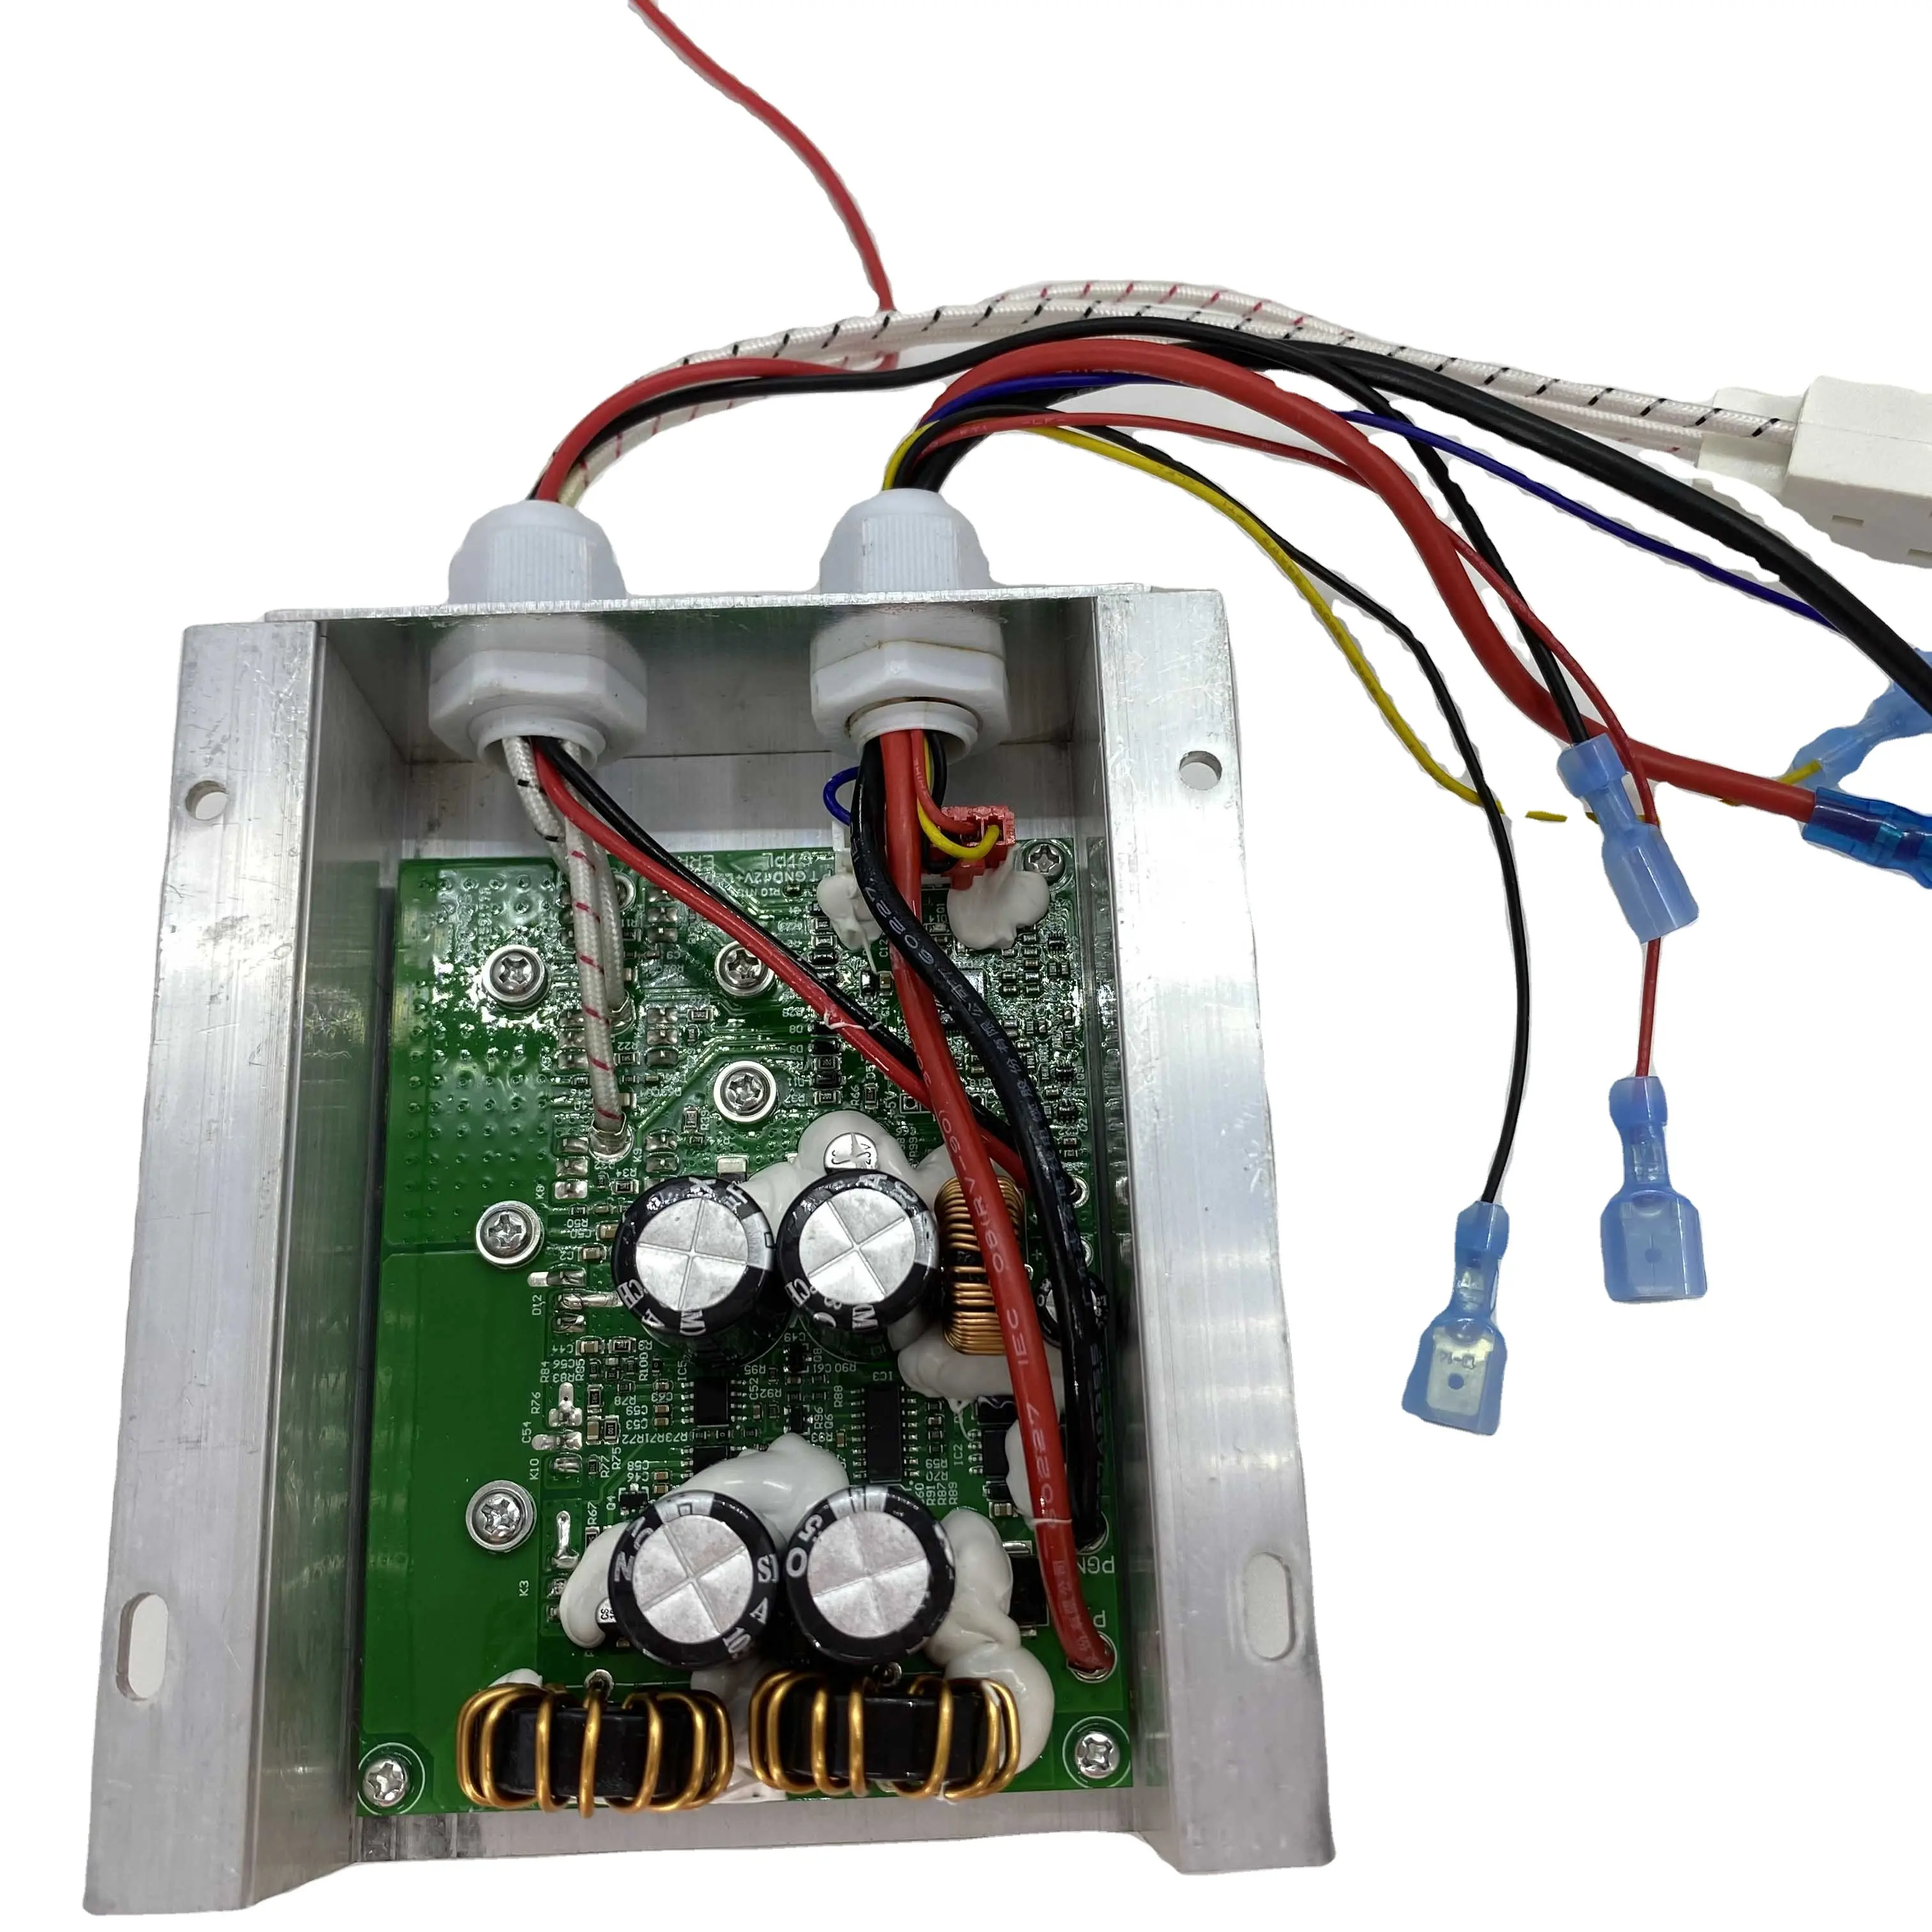 Air cooler inverter air conditioner control board